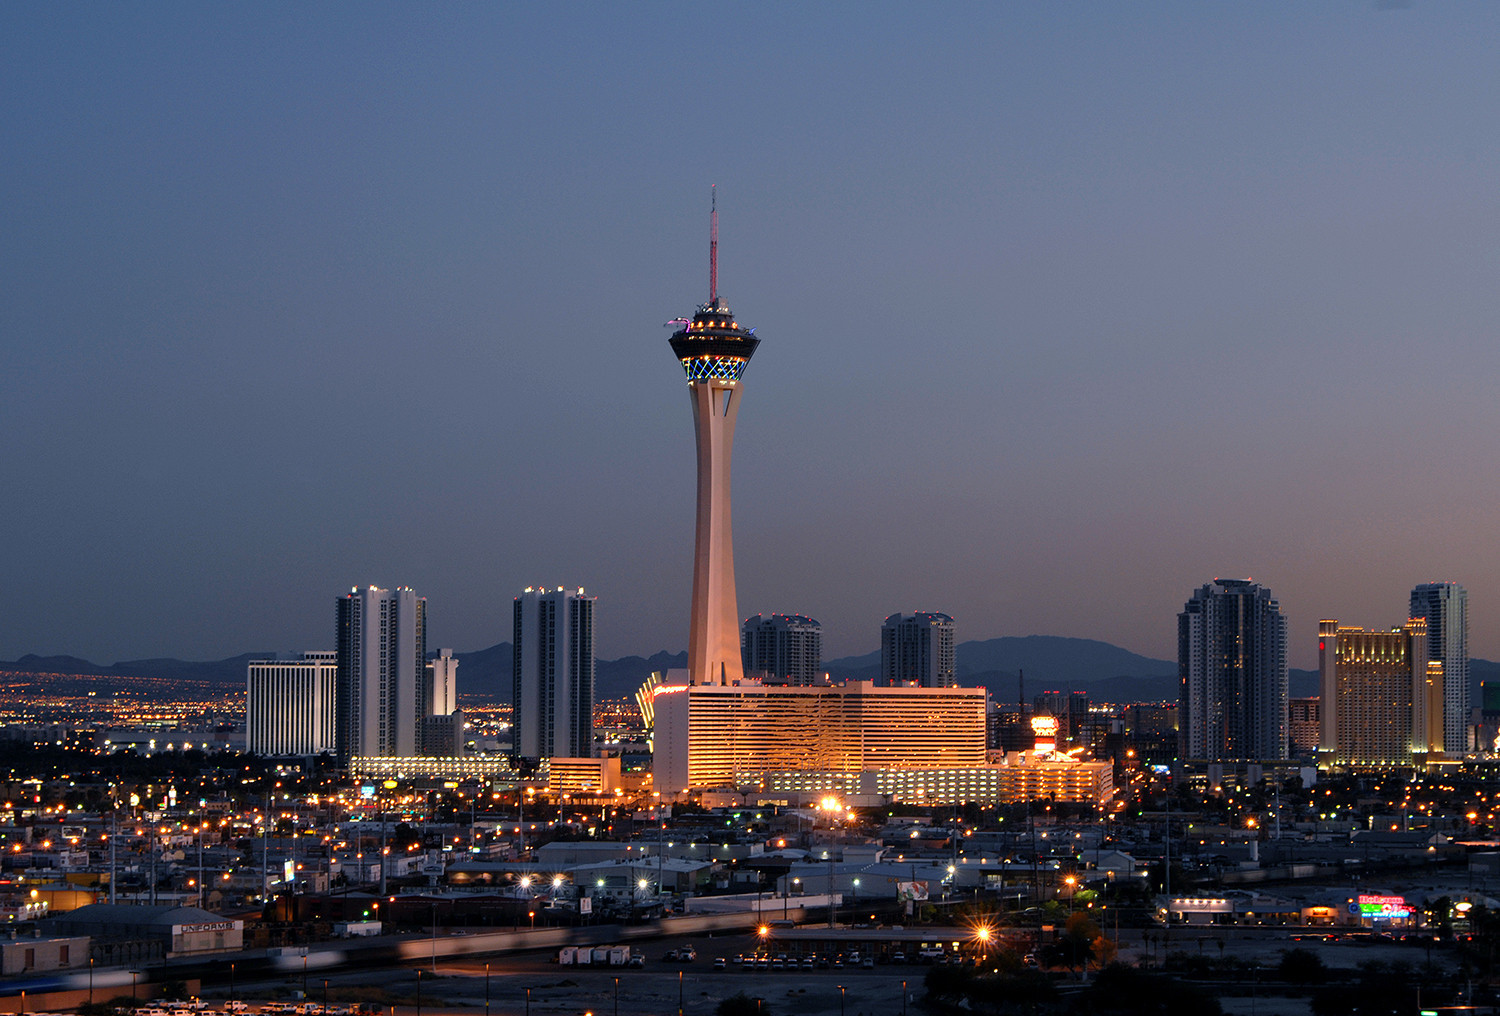 Las Vegas: Stratosphere welcomes visitor No. 40 million ...